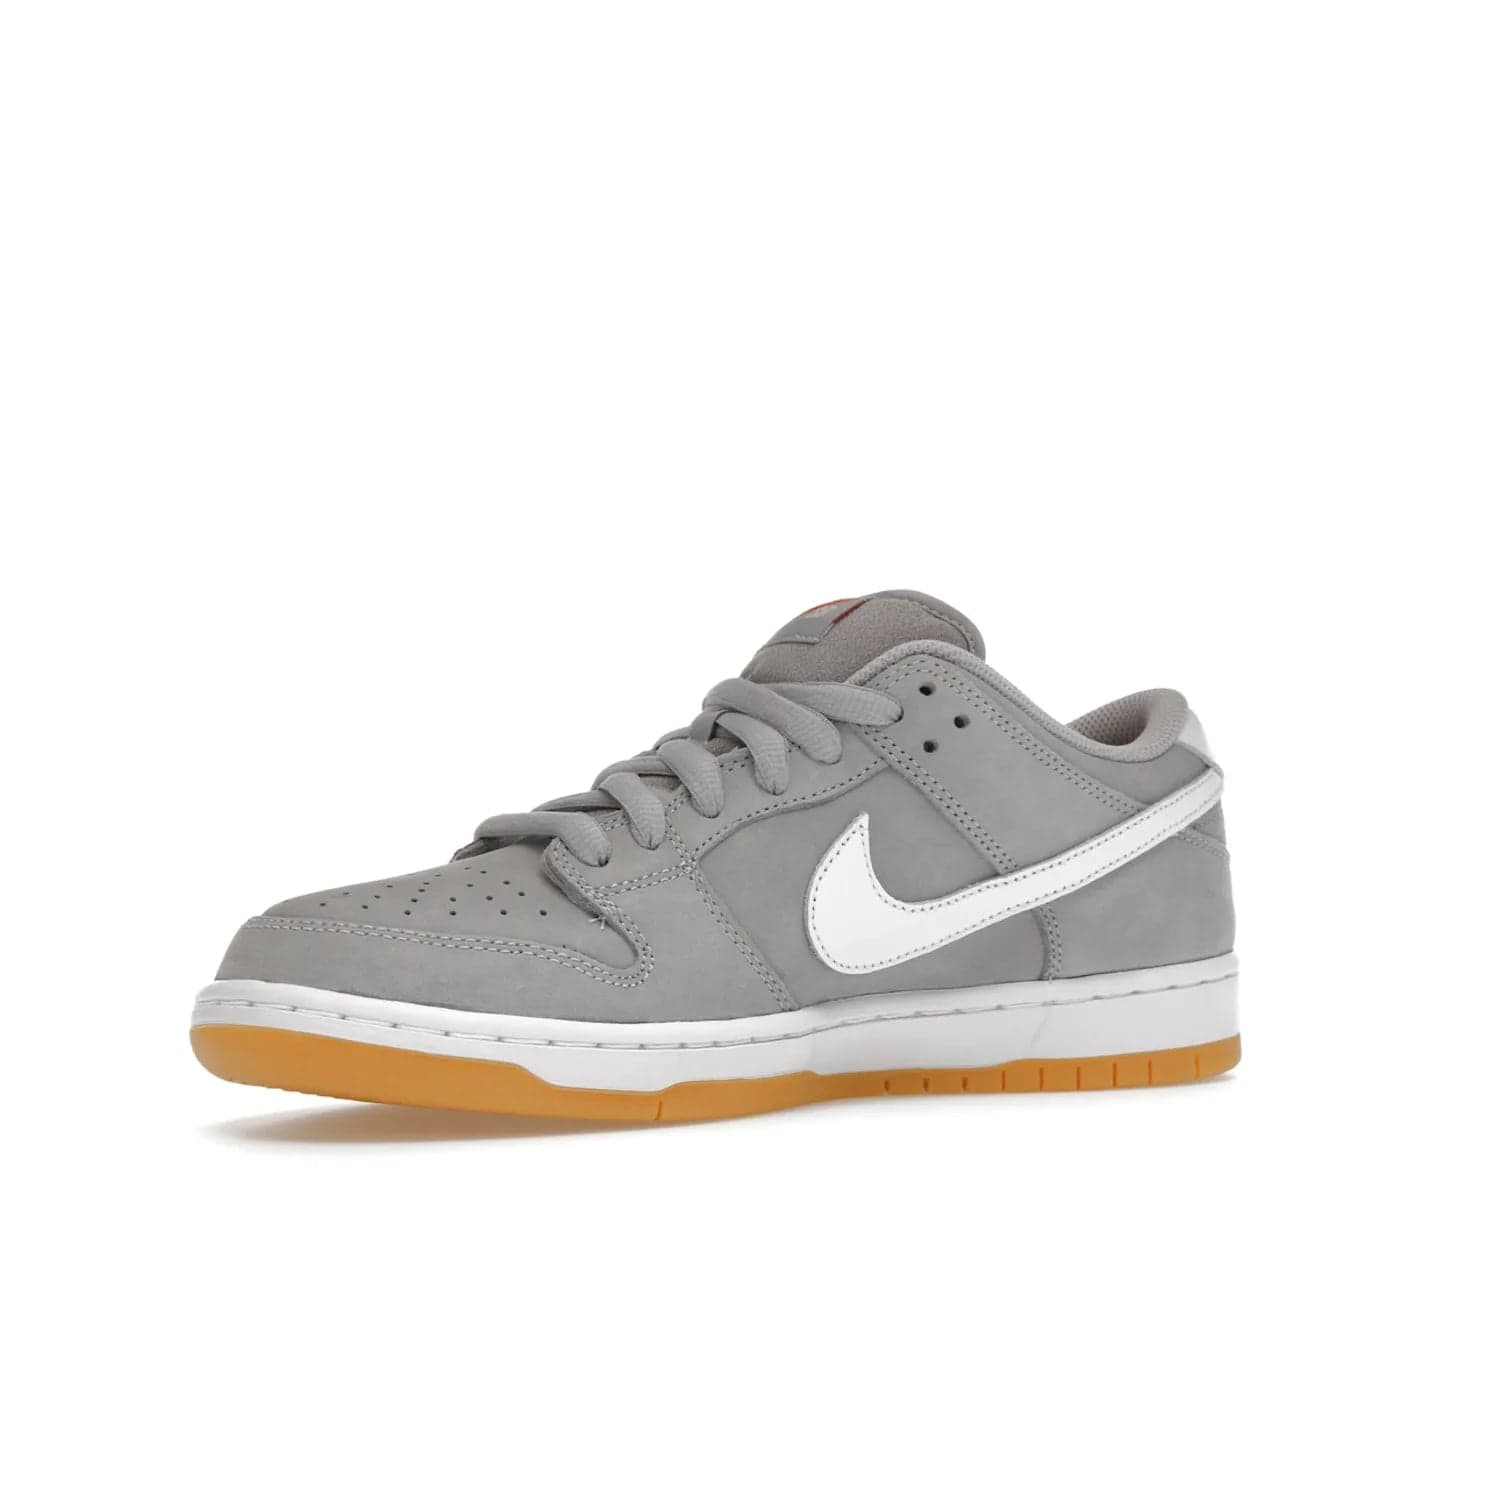 Nike SB Dunk Low Pro ISO Orange Label Wolf Grey Gum - Image 16 - Only at www.BallersClubKickz.com - Introducing Nike's SB Dunk Low Pro ISO Orange Label Wolf Grey Gum - a stylish shoe with a premium Wolf Grey upper, white leather Nike Swoosh, and an eye-catching gum outsole. With special Nike branding and packaging, this shoe adds a unique fashion statement. Out Feb. 24, 2023.